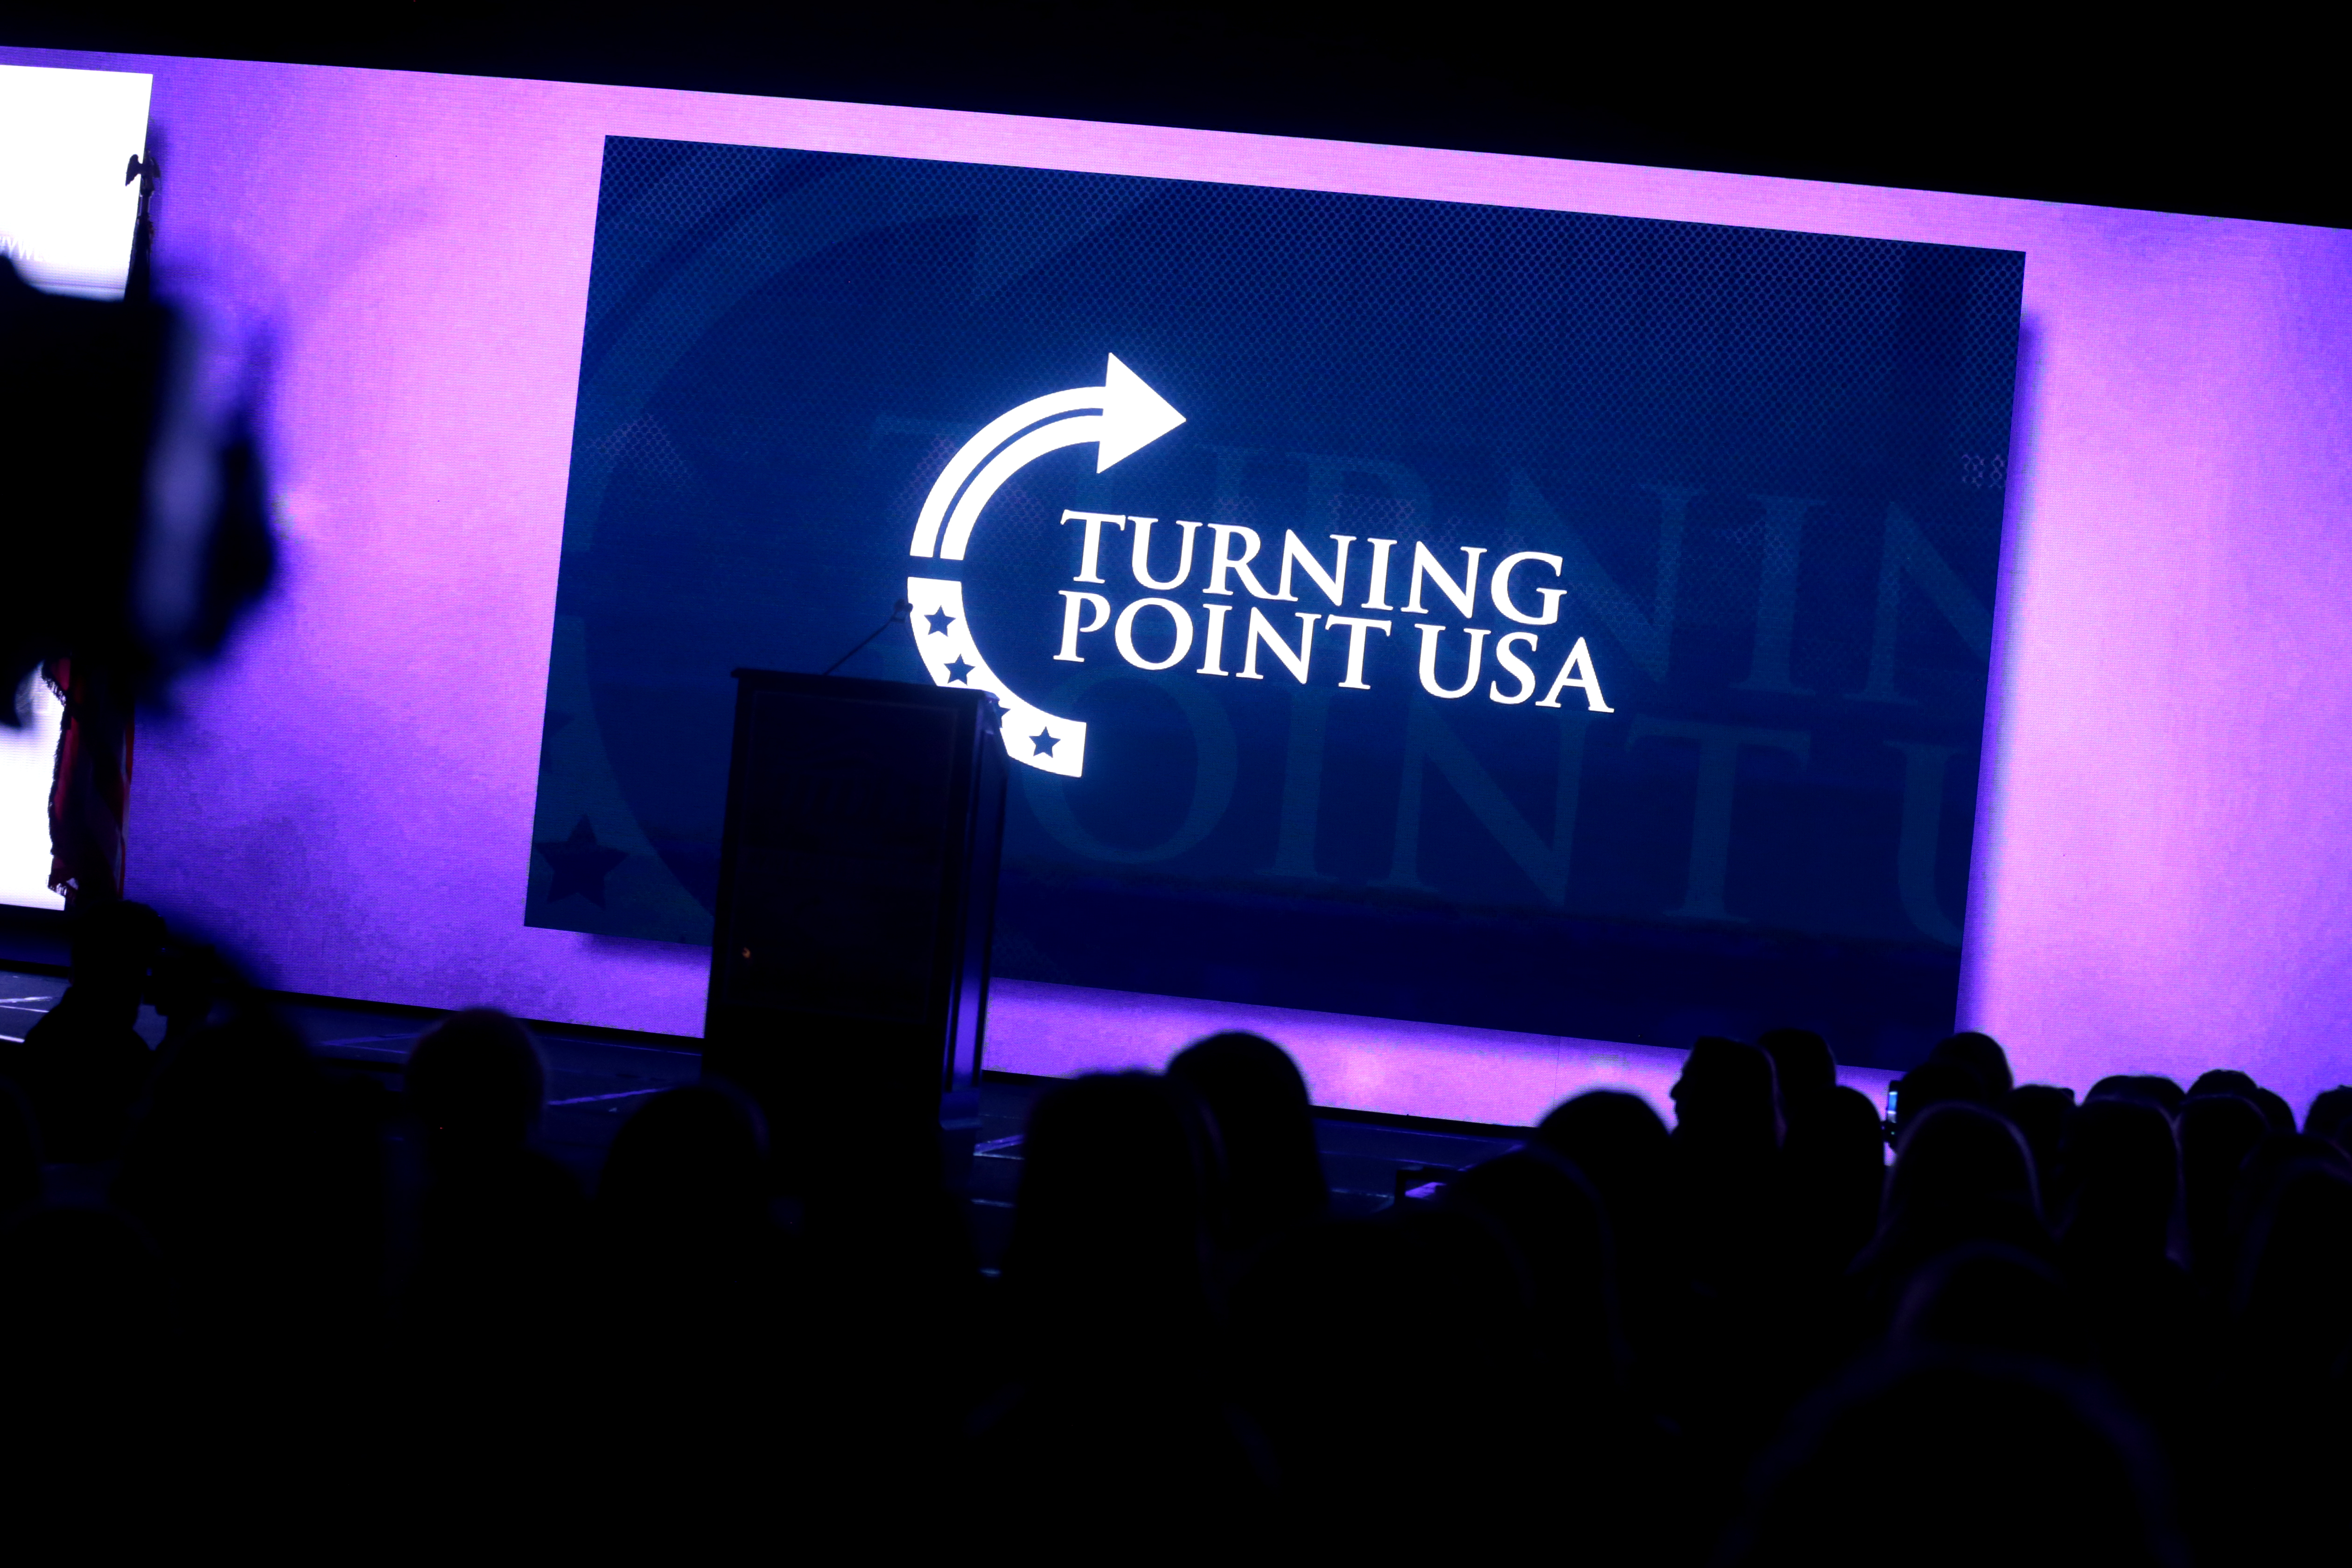 One student's perspective on Turning Point USA The TimesDelphic